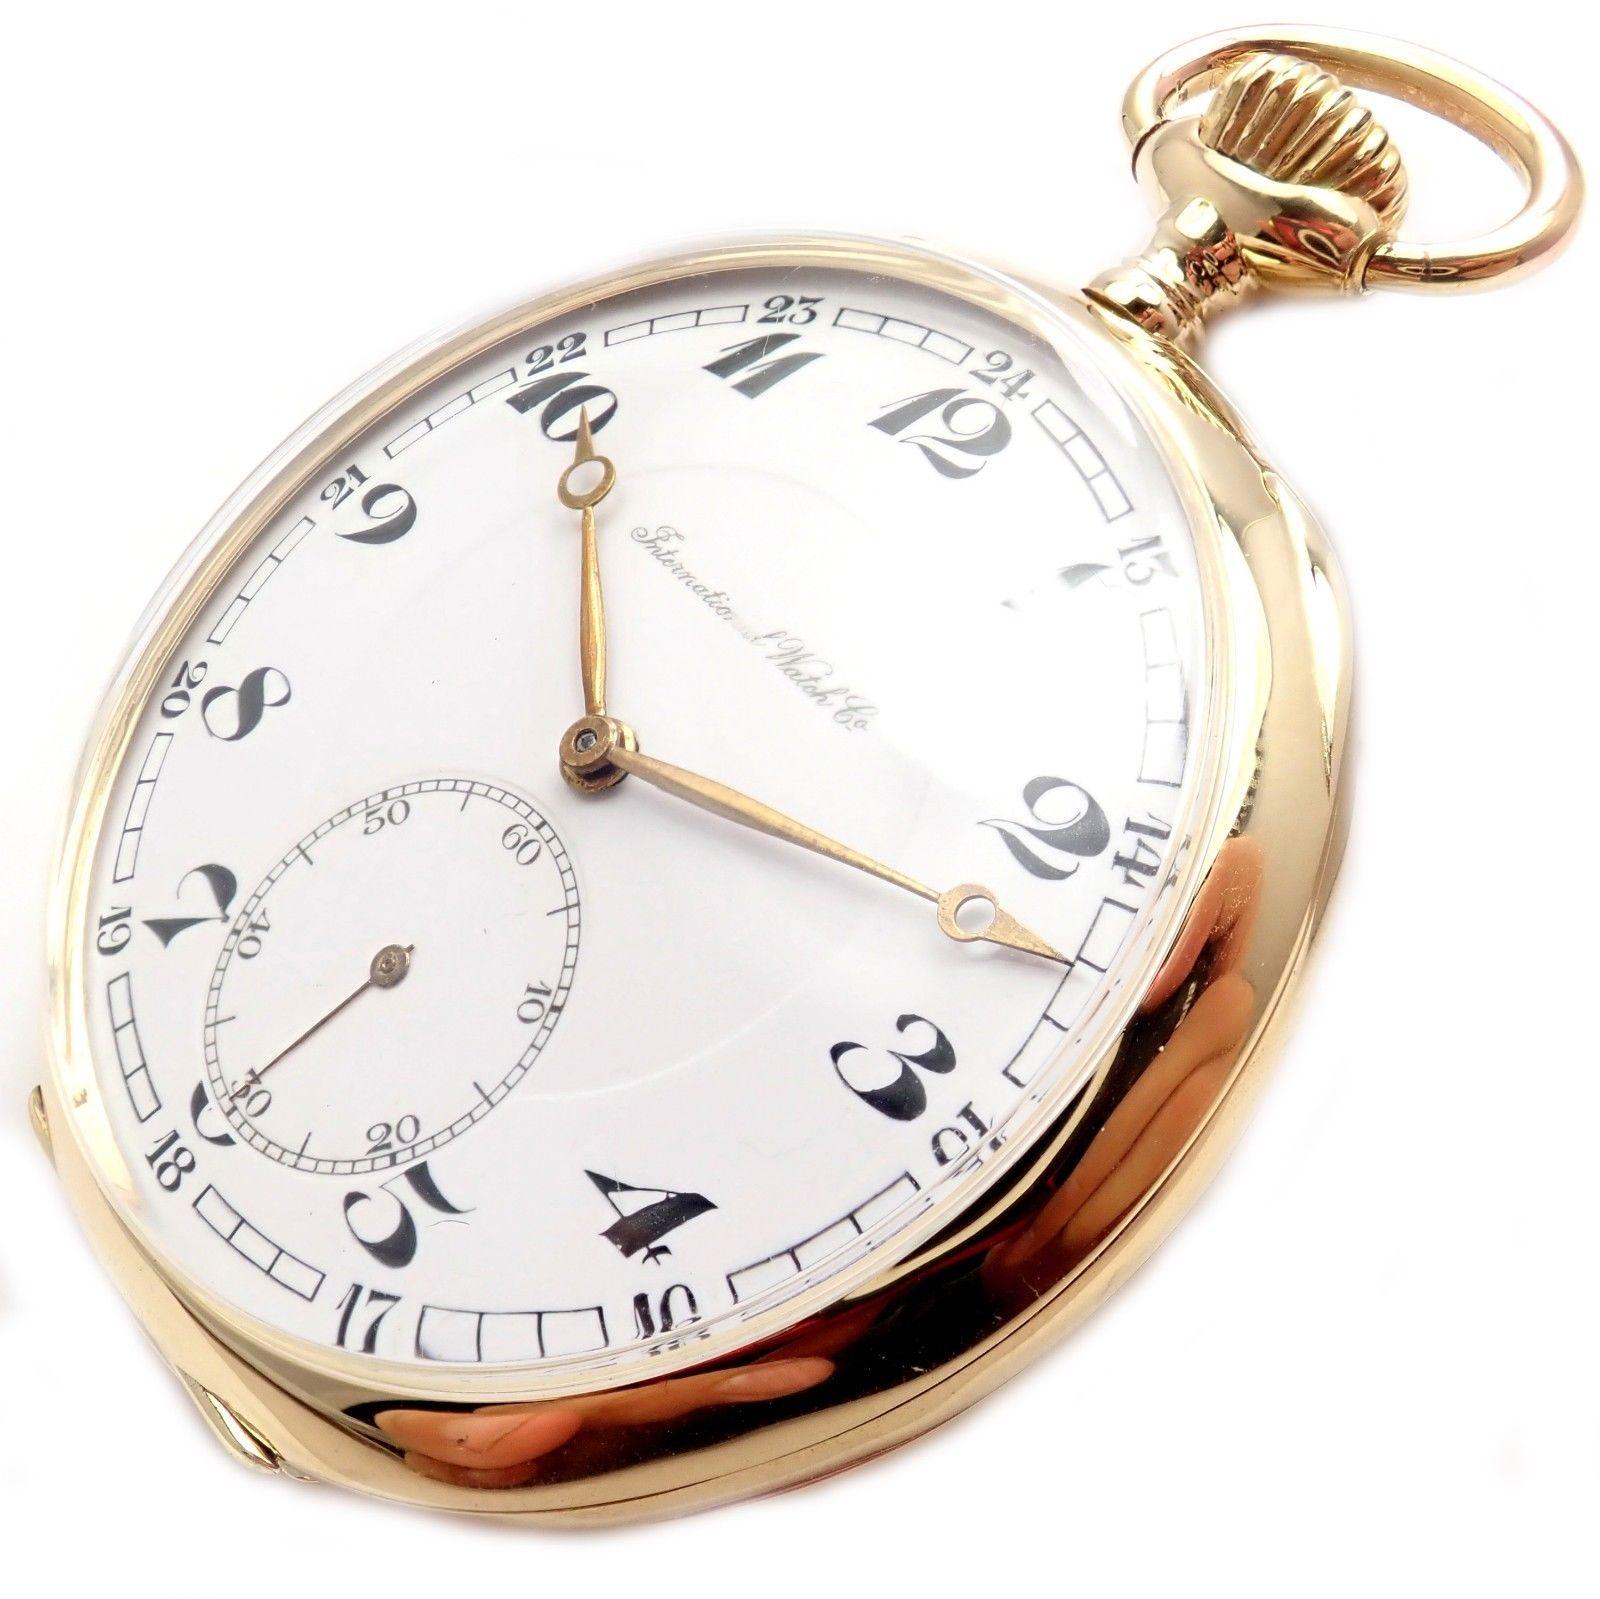 18k yellow gold large 53mm pocket watch by IWC International Watch Co.
This watch works great, fully functional. 
Details:
Case Size: 53mm
Weight: 95.5 grams
Dial: White
Movement: Manual Wind
Stamped Hallmarks: Dial: International Watch Co.
Inner